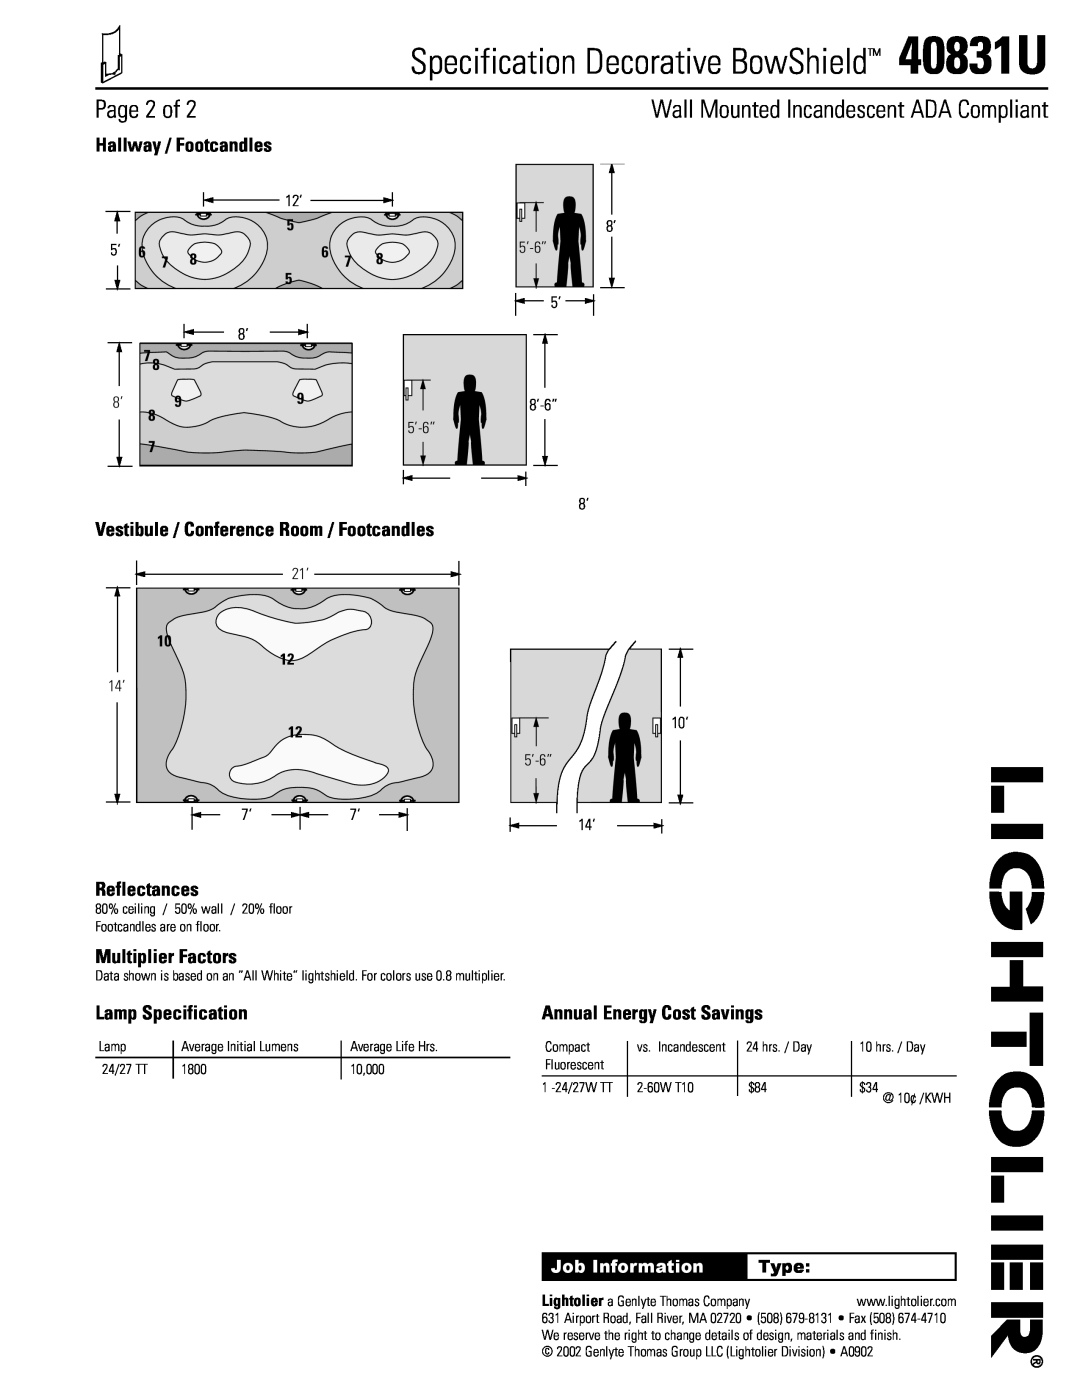 Lightolier manual Page 2 of, Specification Decorative BowShield 40831U, Wall Mounted Incandescent ADA Compliant, Type 